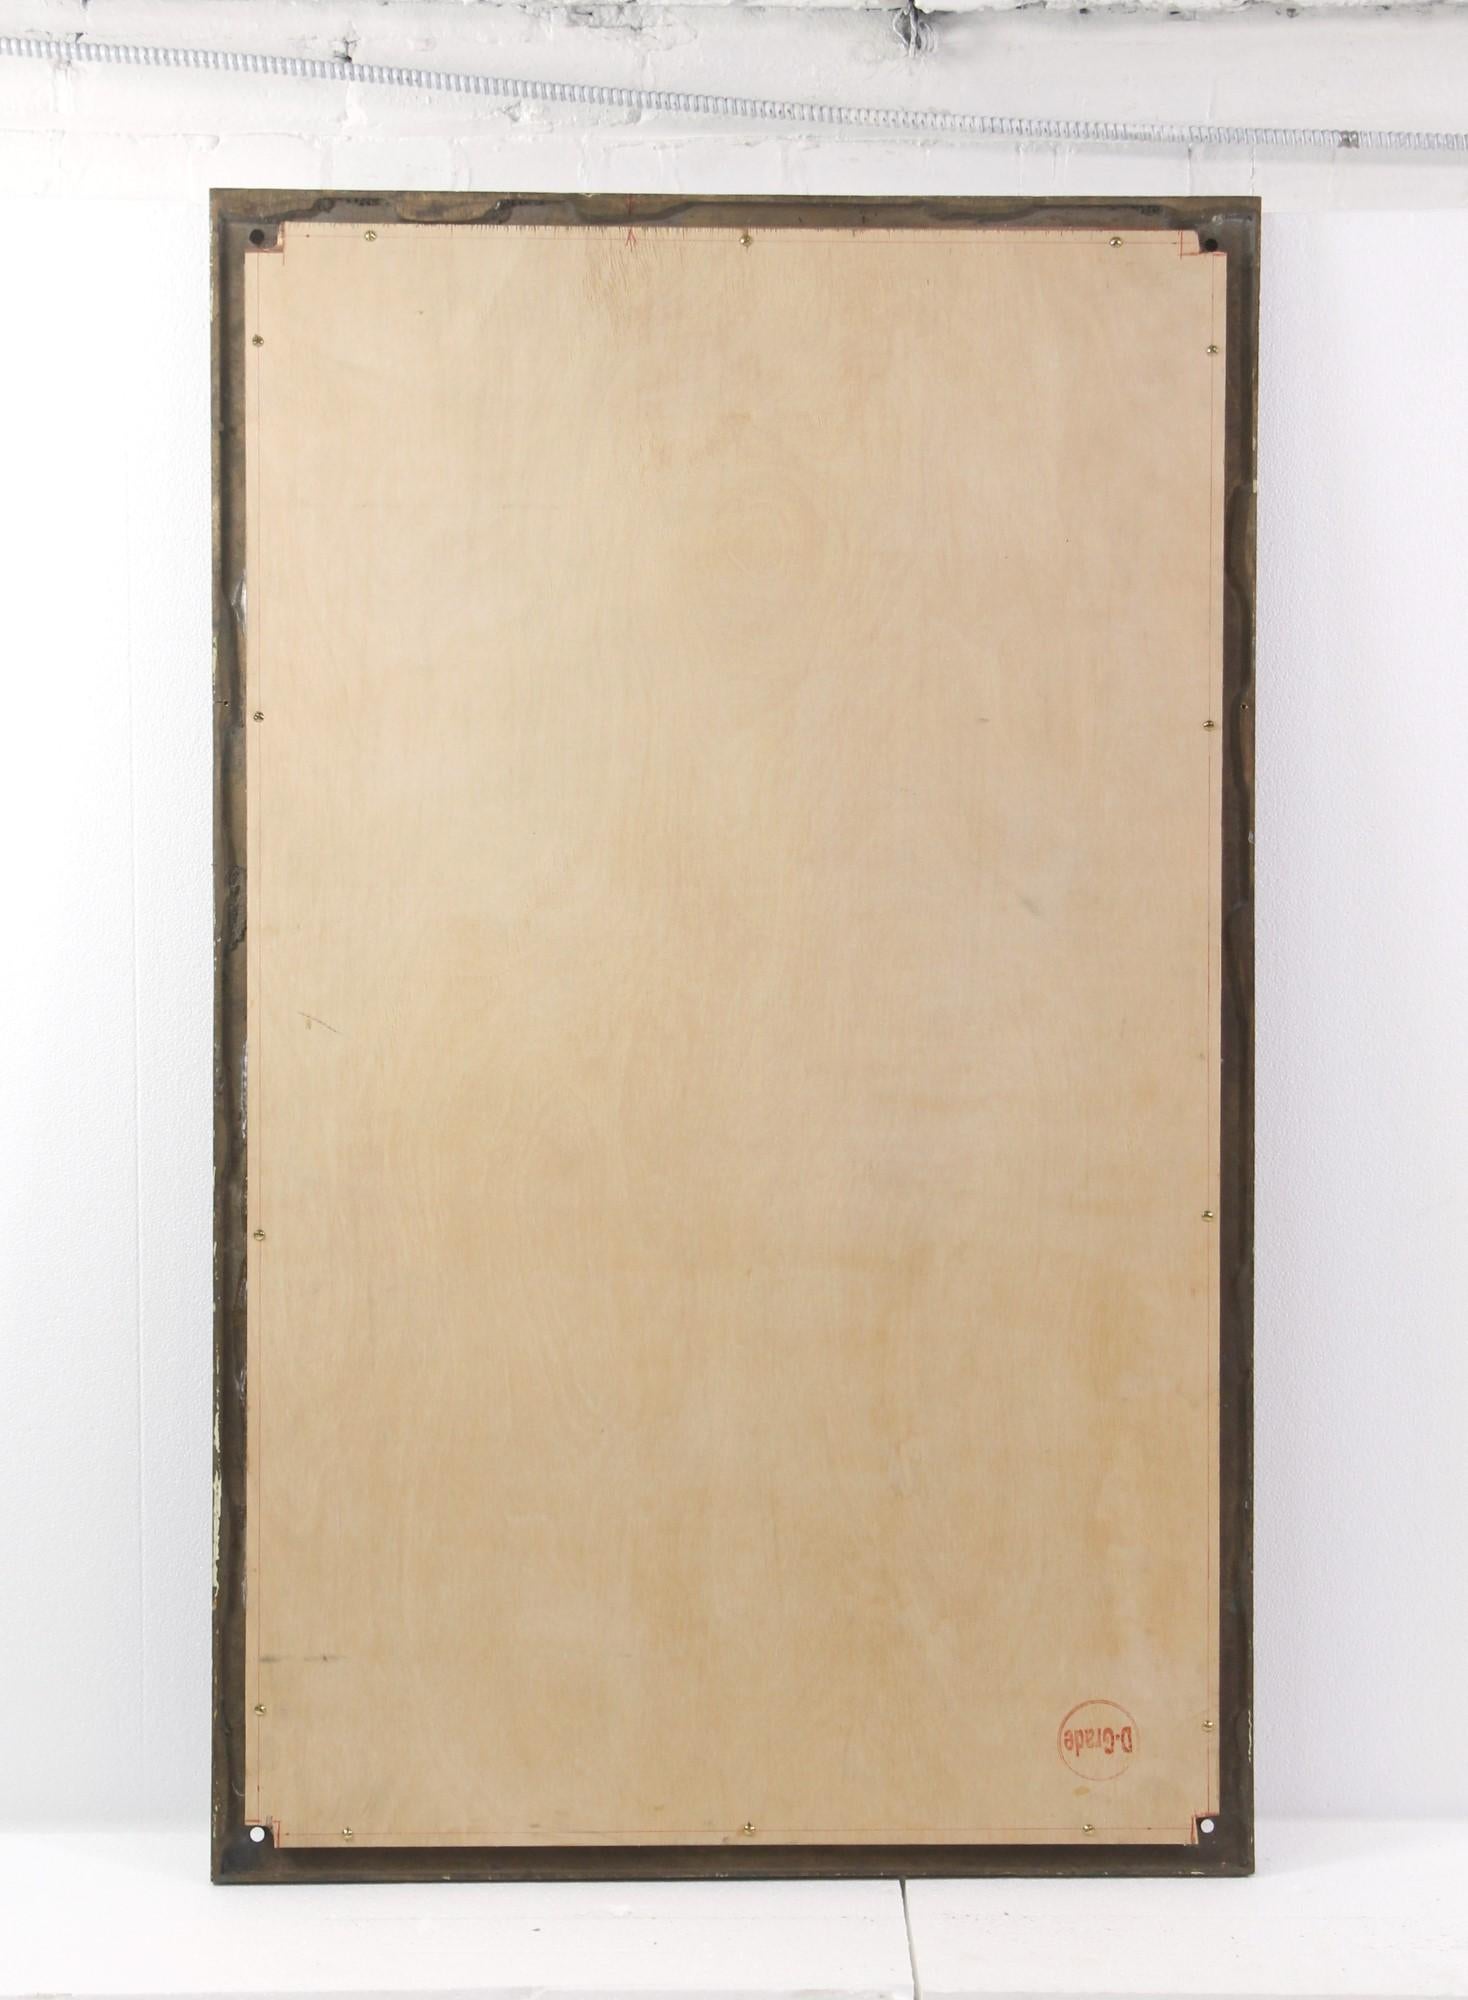 American Bronze Framed Distressed Mirror Foliage Pattern  4 ft Tall For Sale